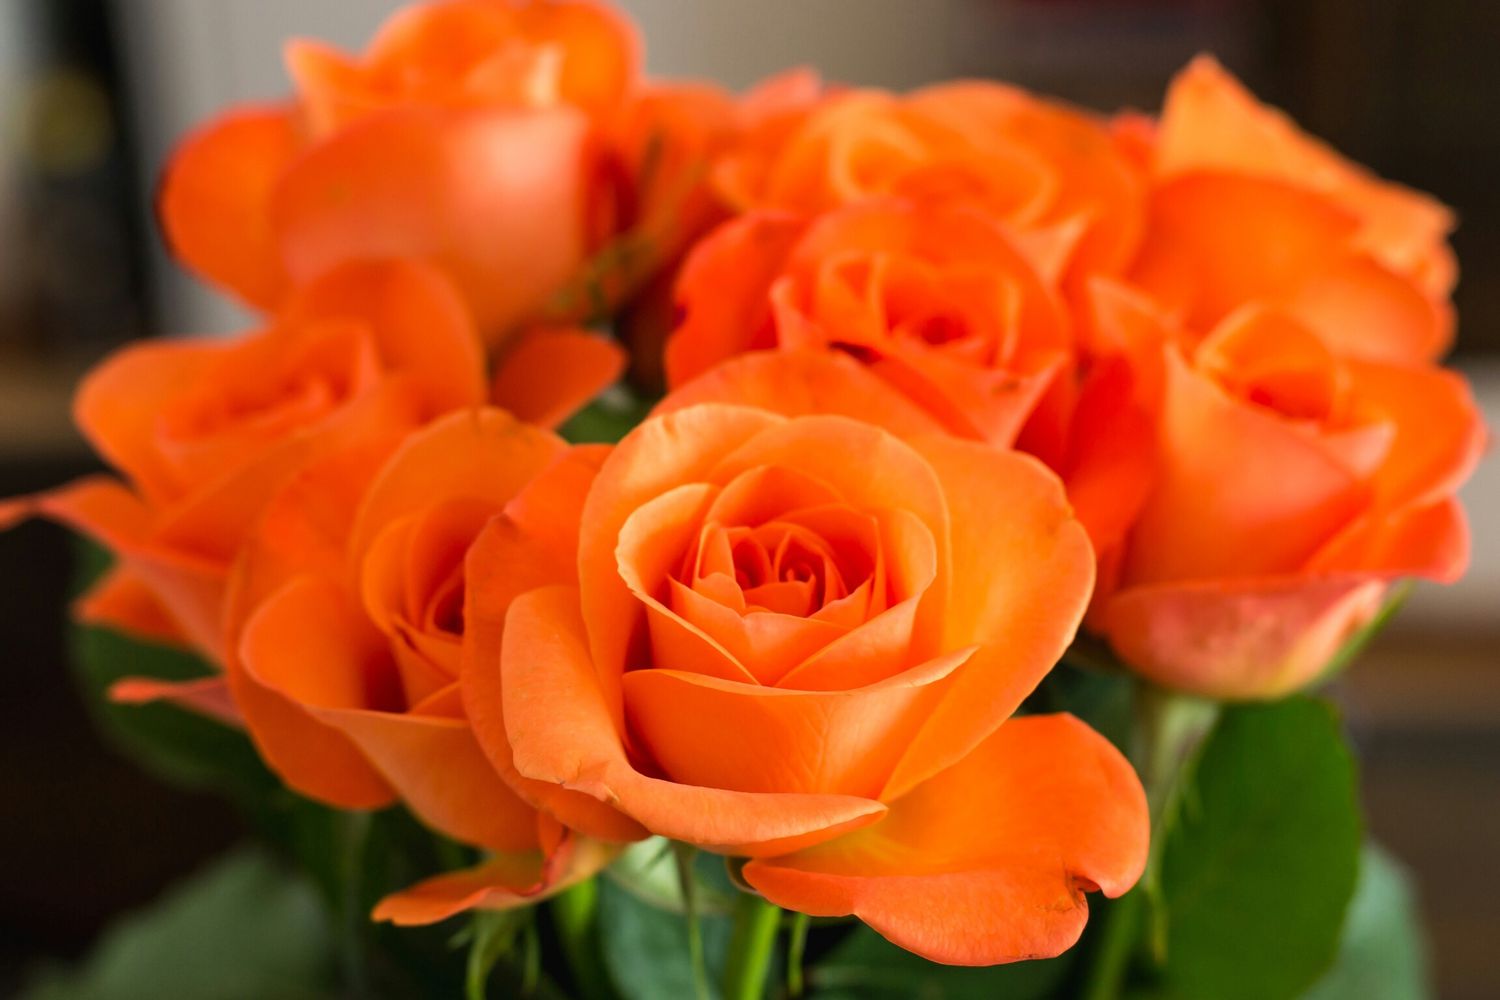 Orange Roses Meaning Love, Friendship, and More